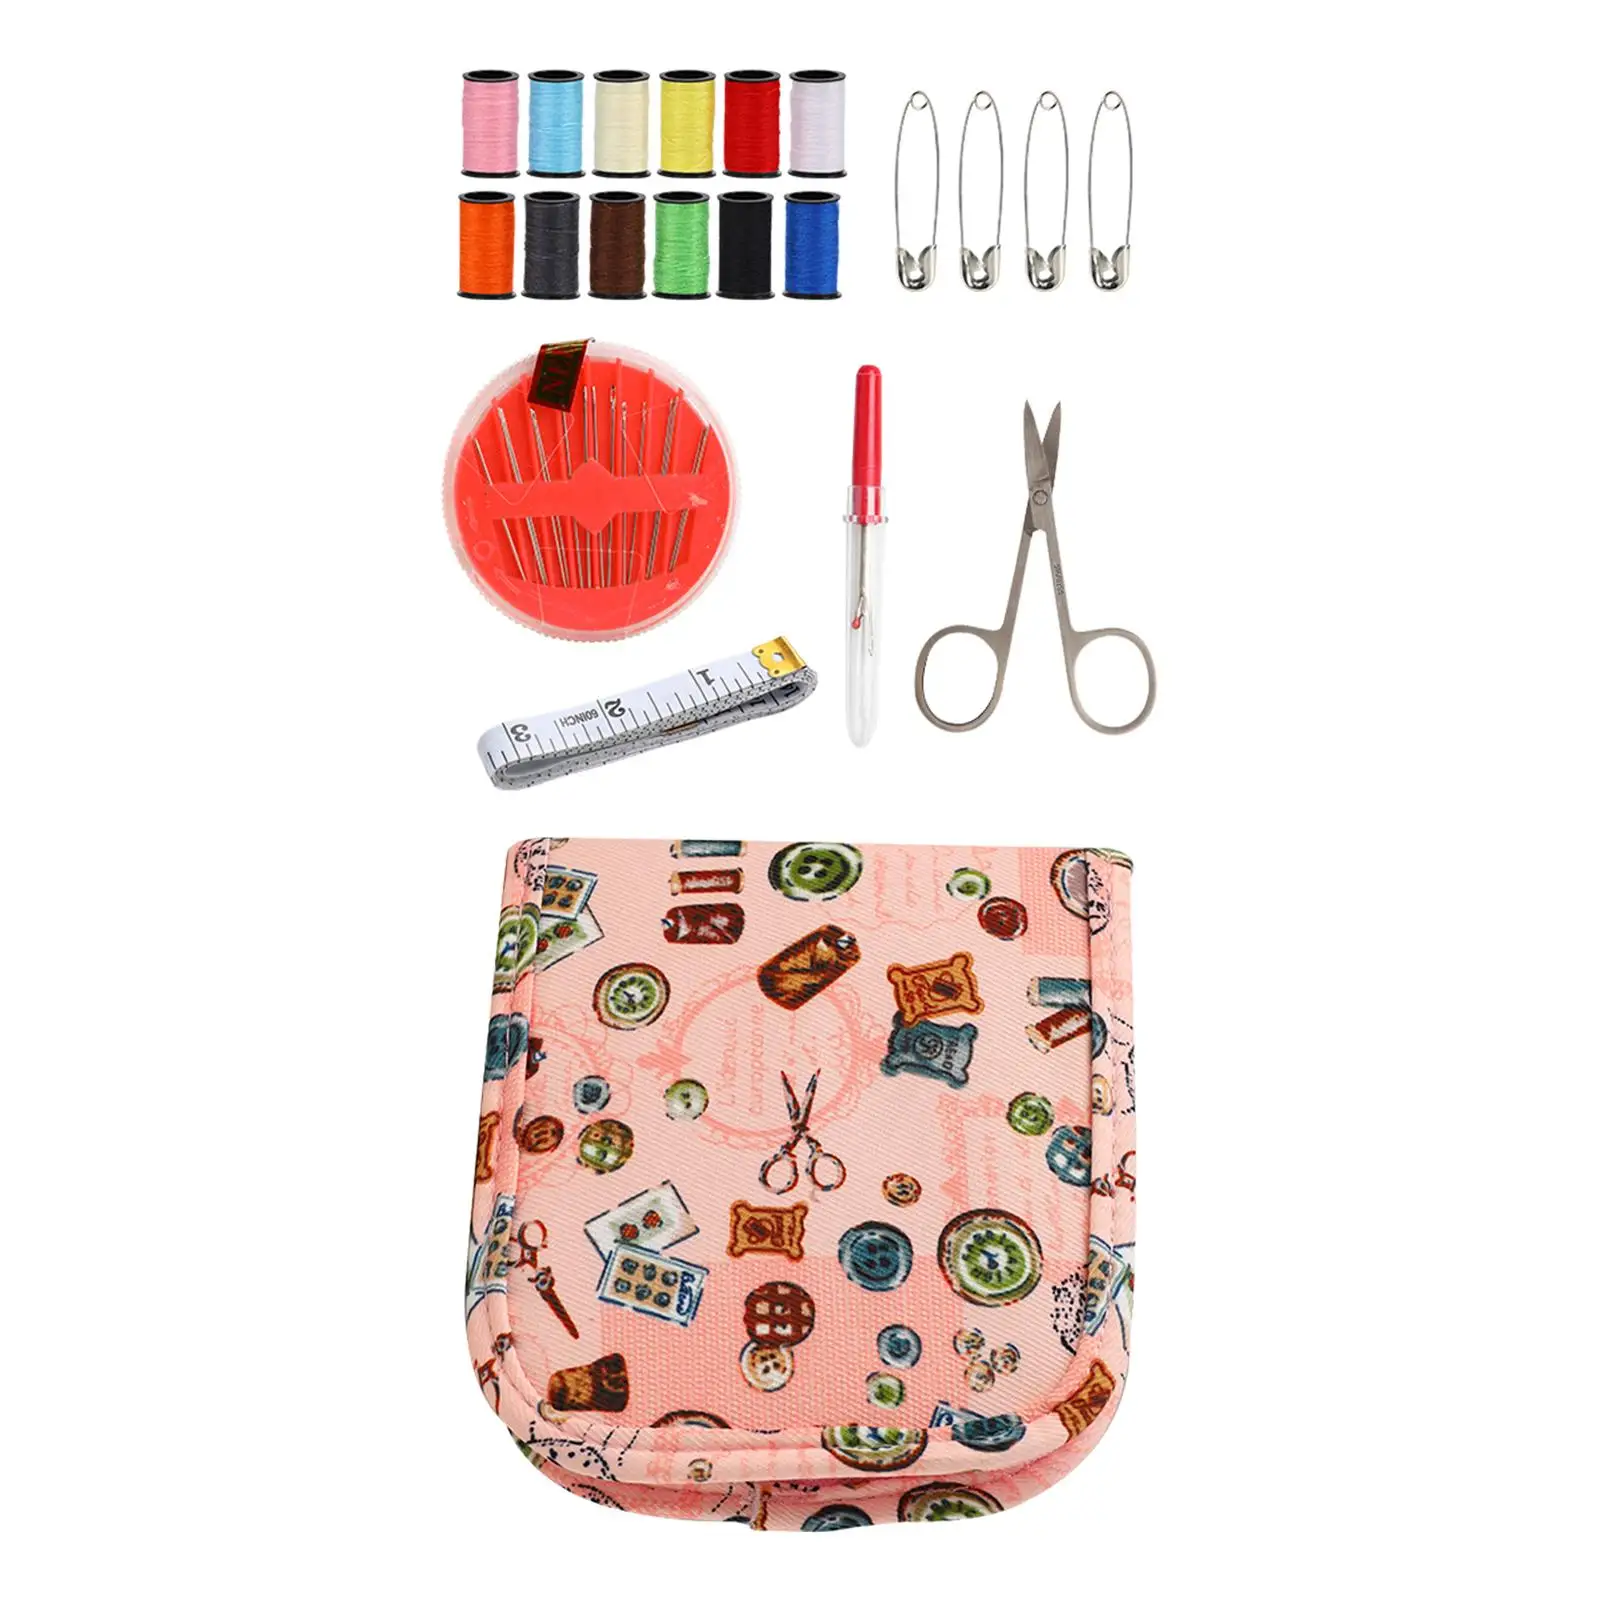 Thread Sewing Needle Set Sewing Kits Scissors Sewing Supplies with Carrying Case Handwork Tool Tape Measure Sewing Thread Set